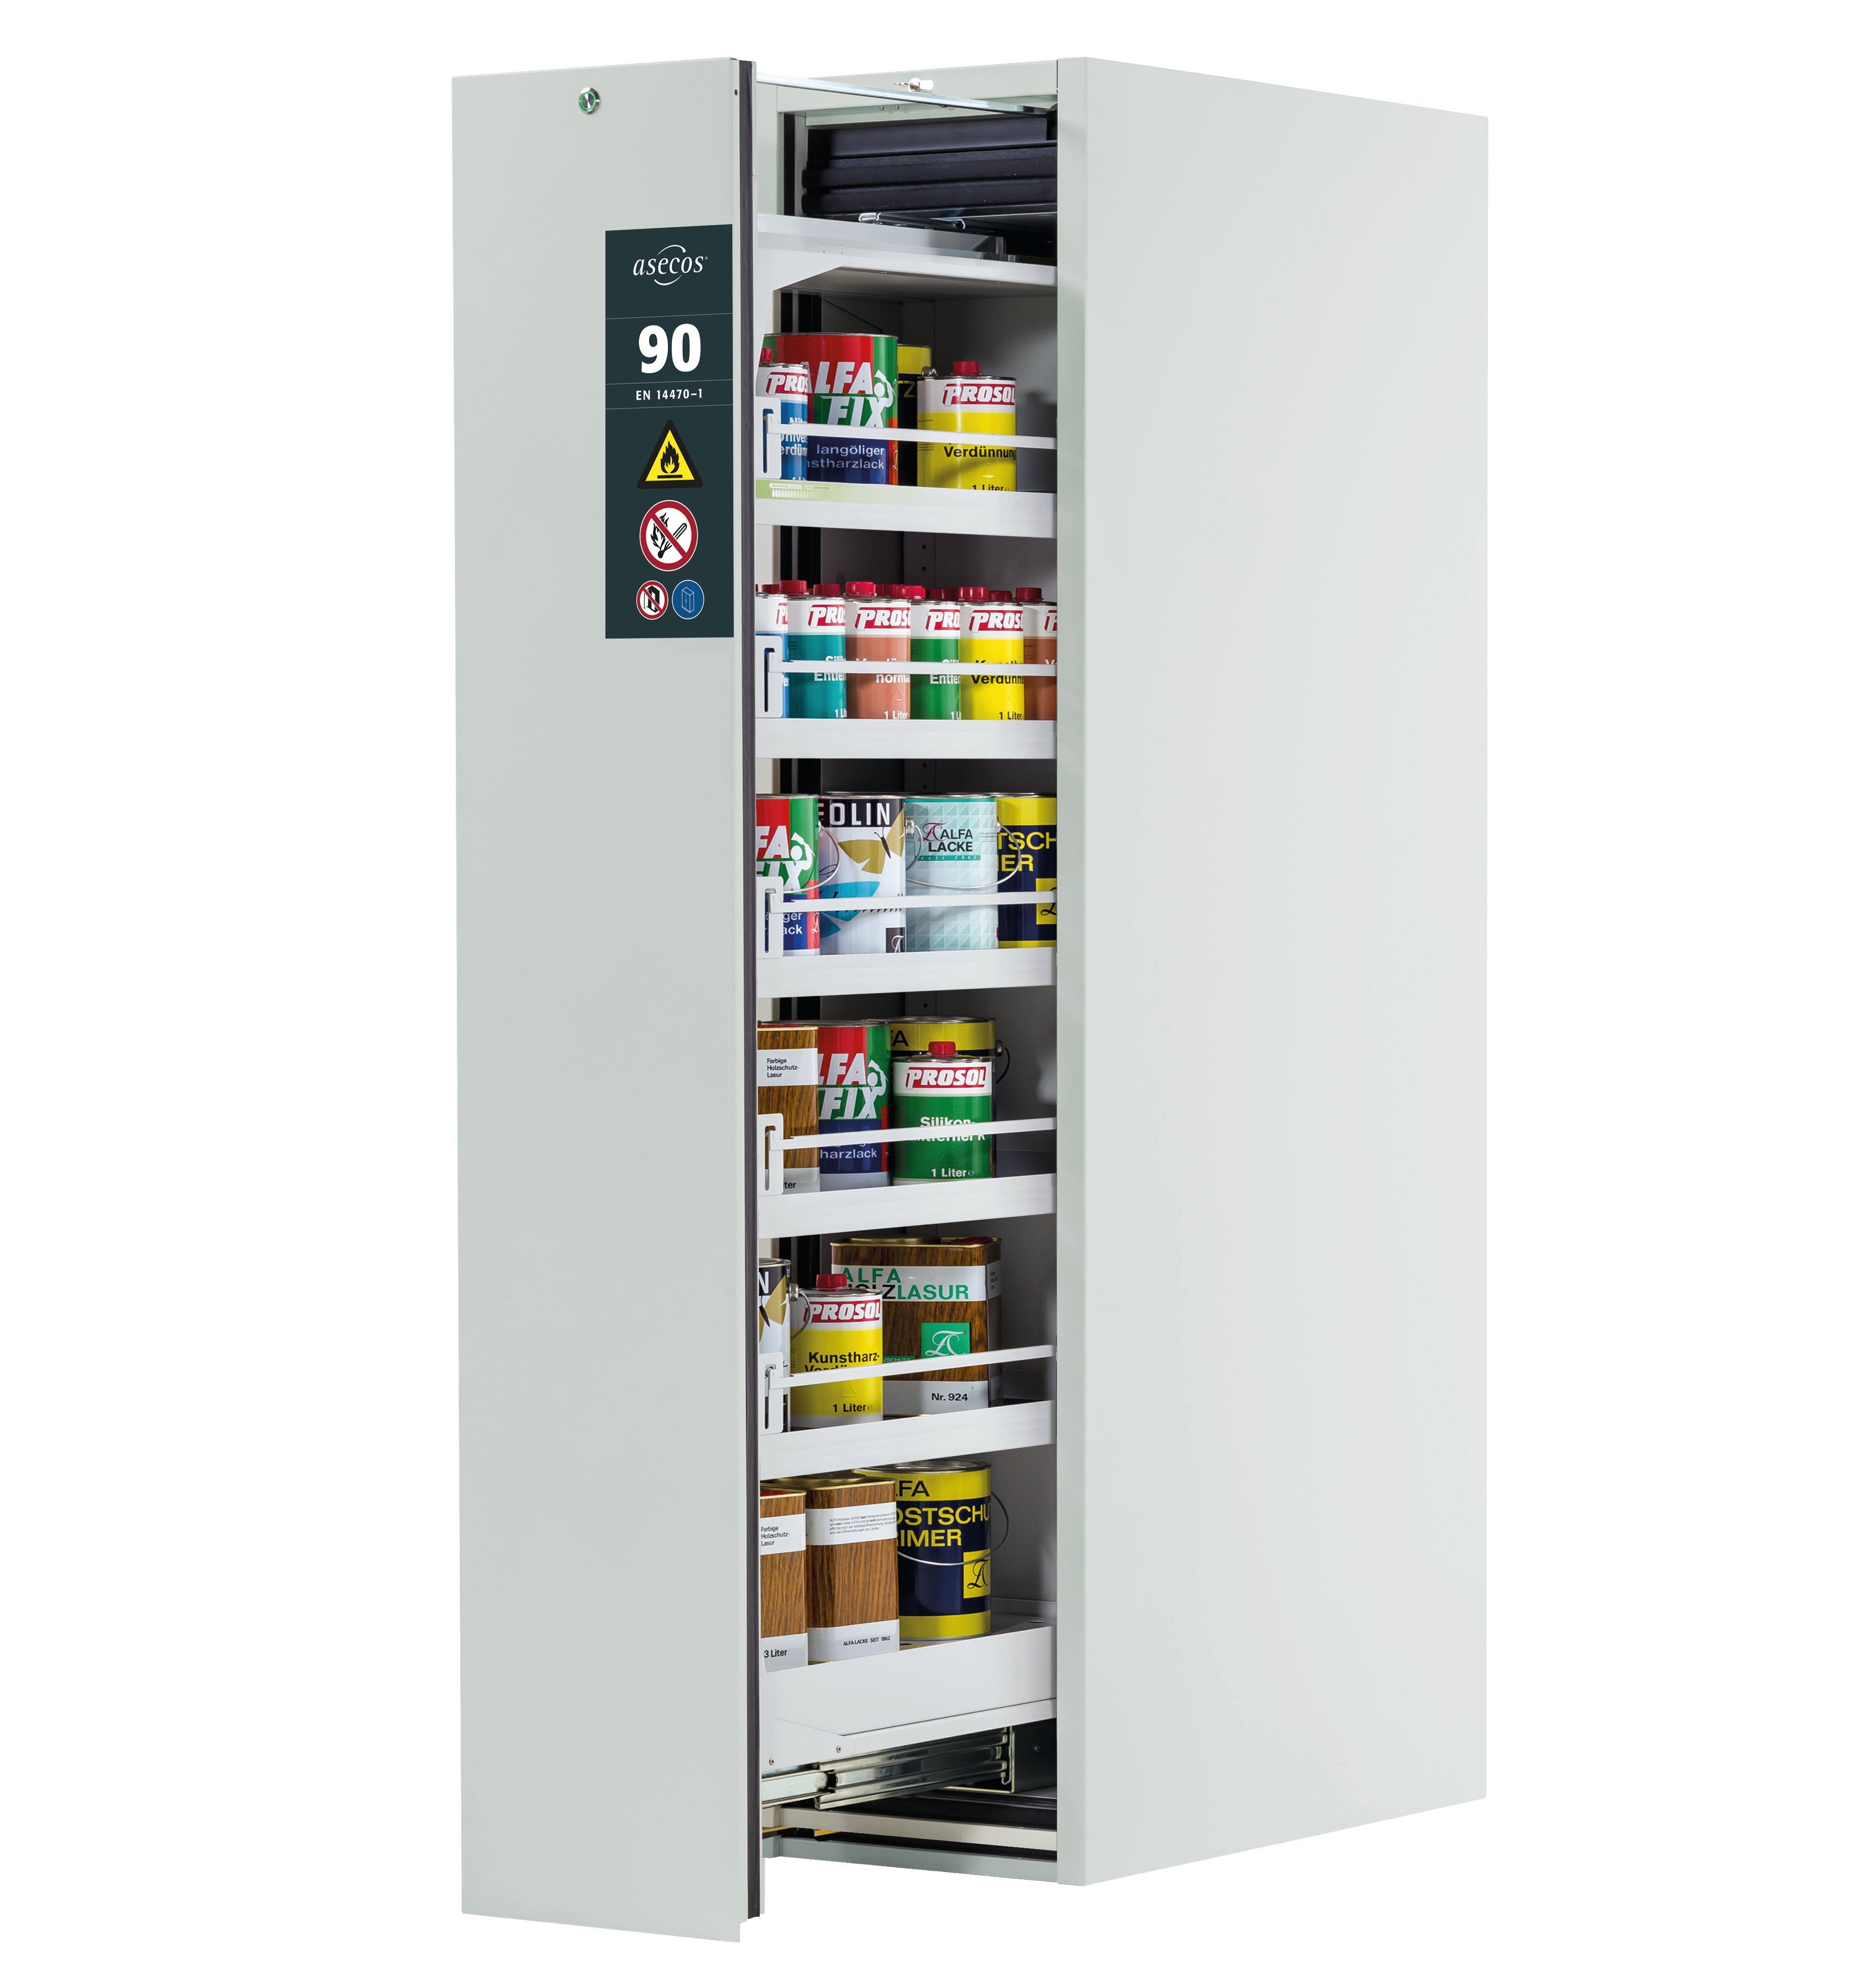 Type 90 safety cabinet V-MOVE-90 model V90.196.045.VDAC:0012 in light gray RAL 7035 with 5x standard tray base (sheet steel)